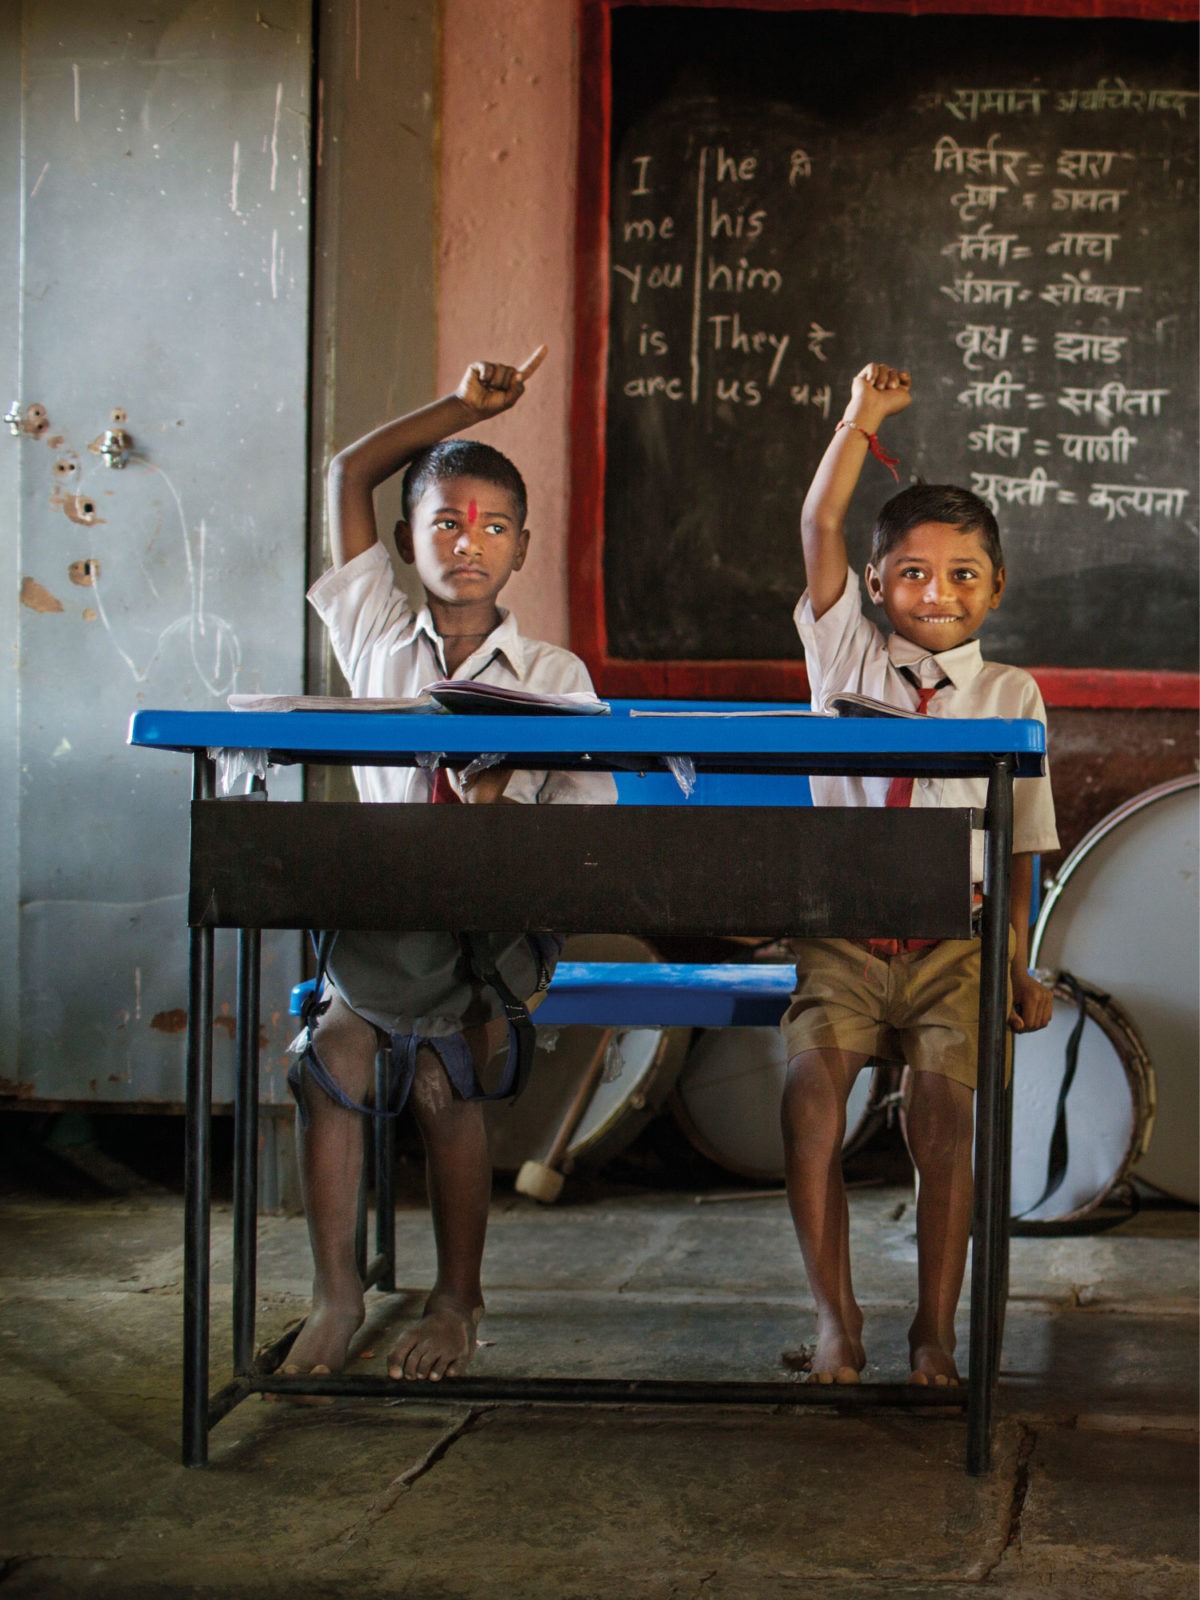 Two boys, all dressed in school uniforms sit with their hands raised in worn-down classroom. One boy smiles.